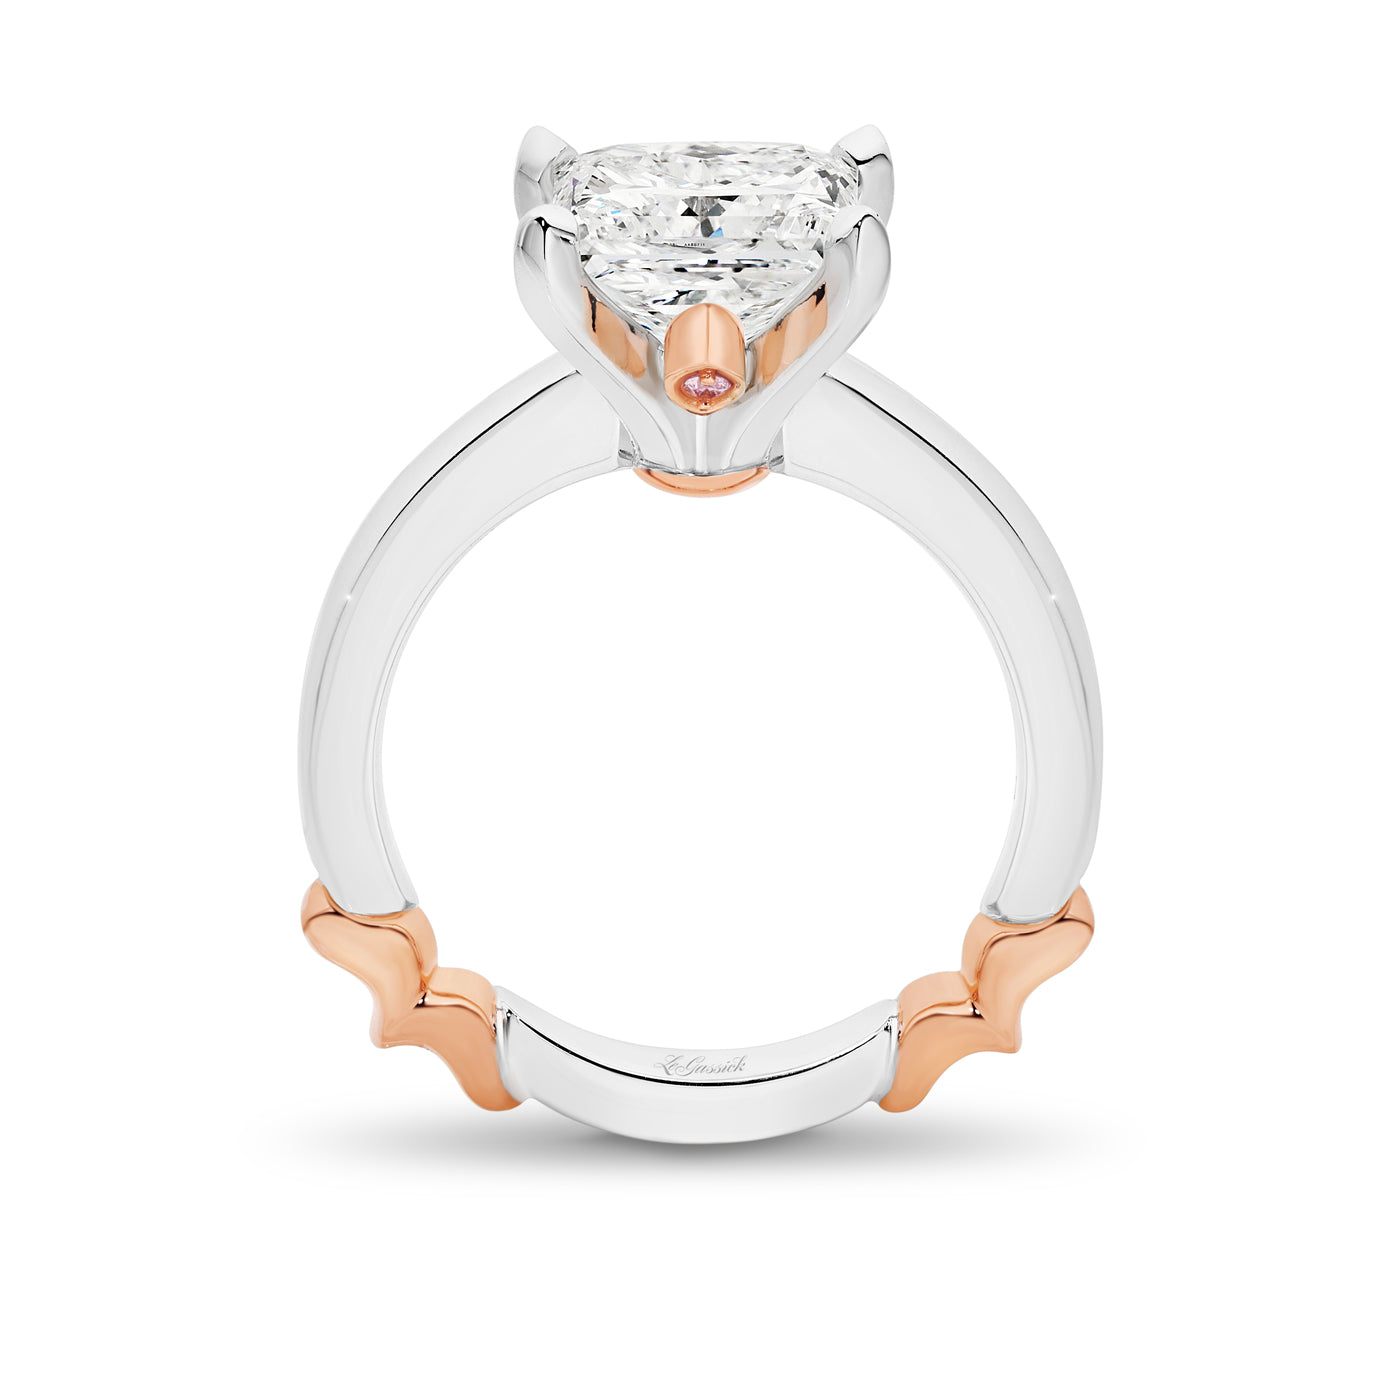 Juliette has a 3.73 Carat Princess Cut diamond centre stone. Set in 18-carat white and rose gold with three rare natural Argyle Pink diamonds. She was designed and handcrafted by LeGassick's Master Jewellers, Gold Coast, Australia.